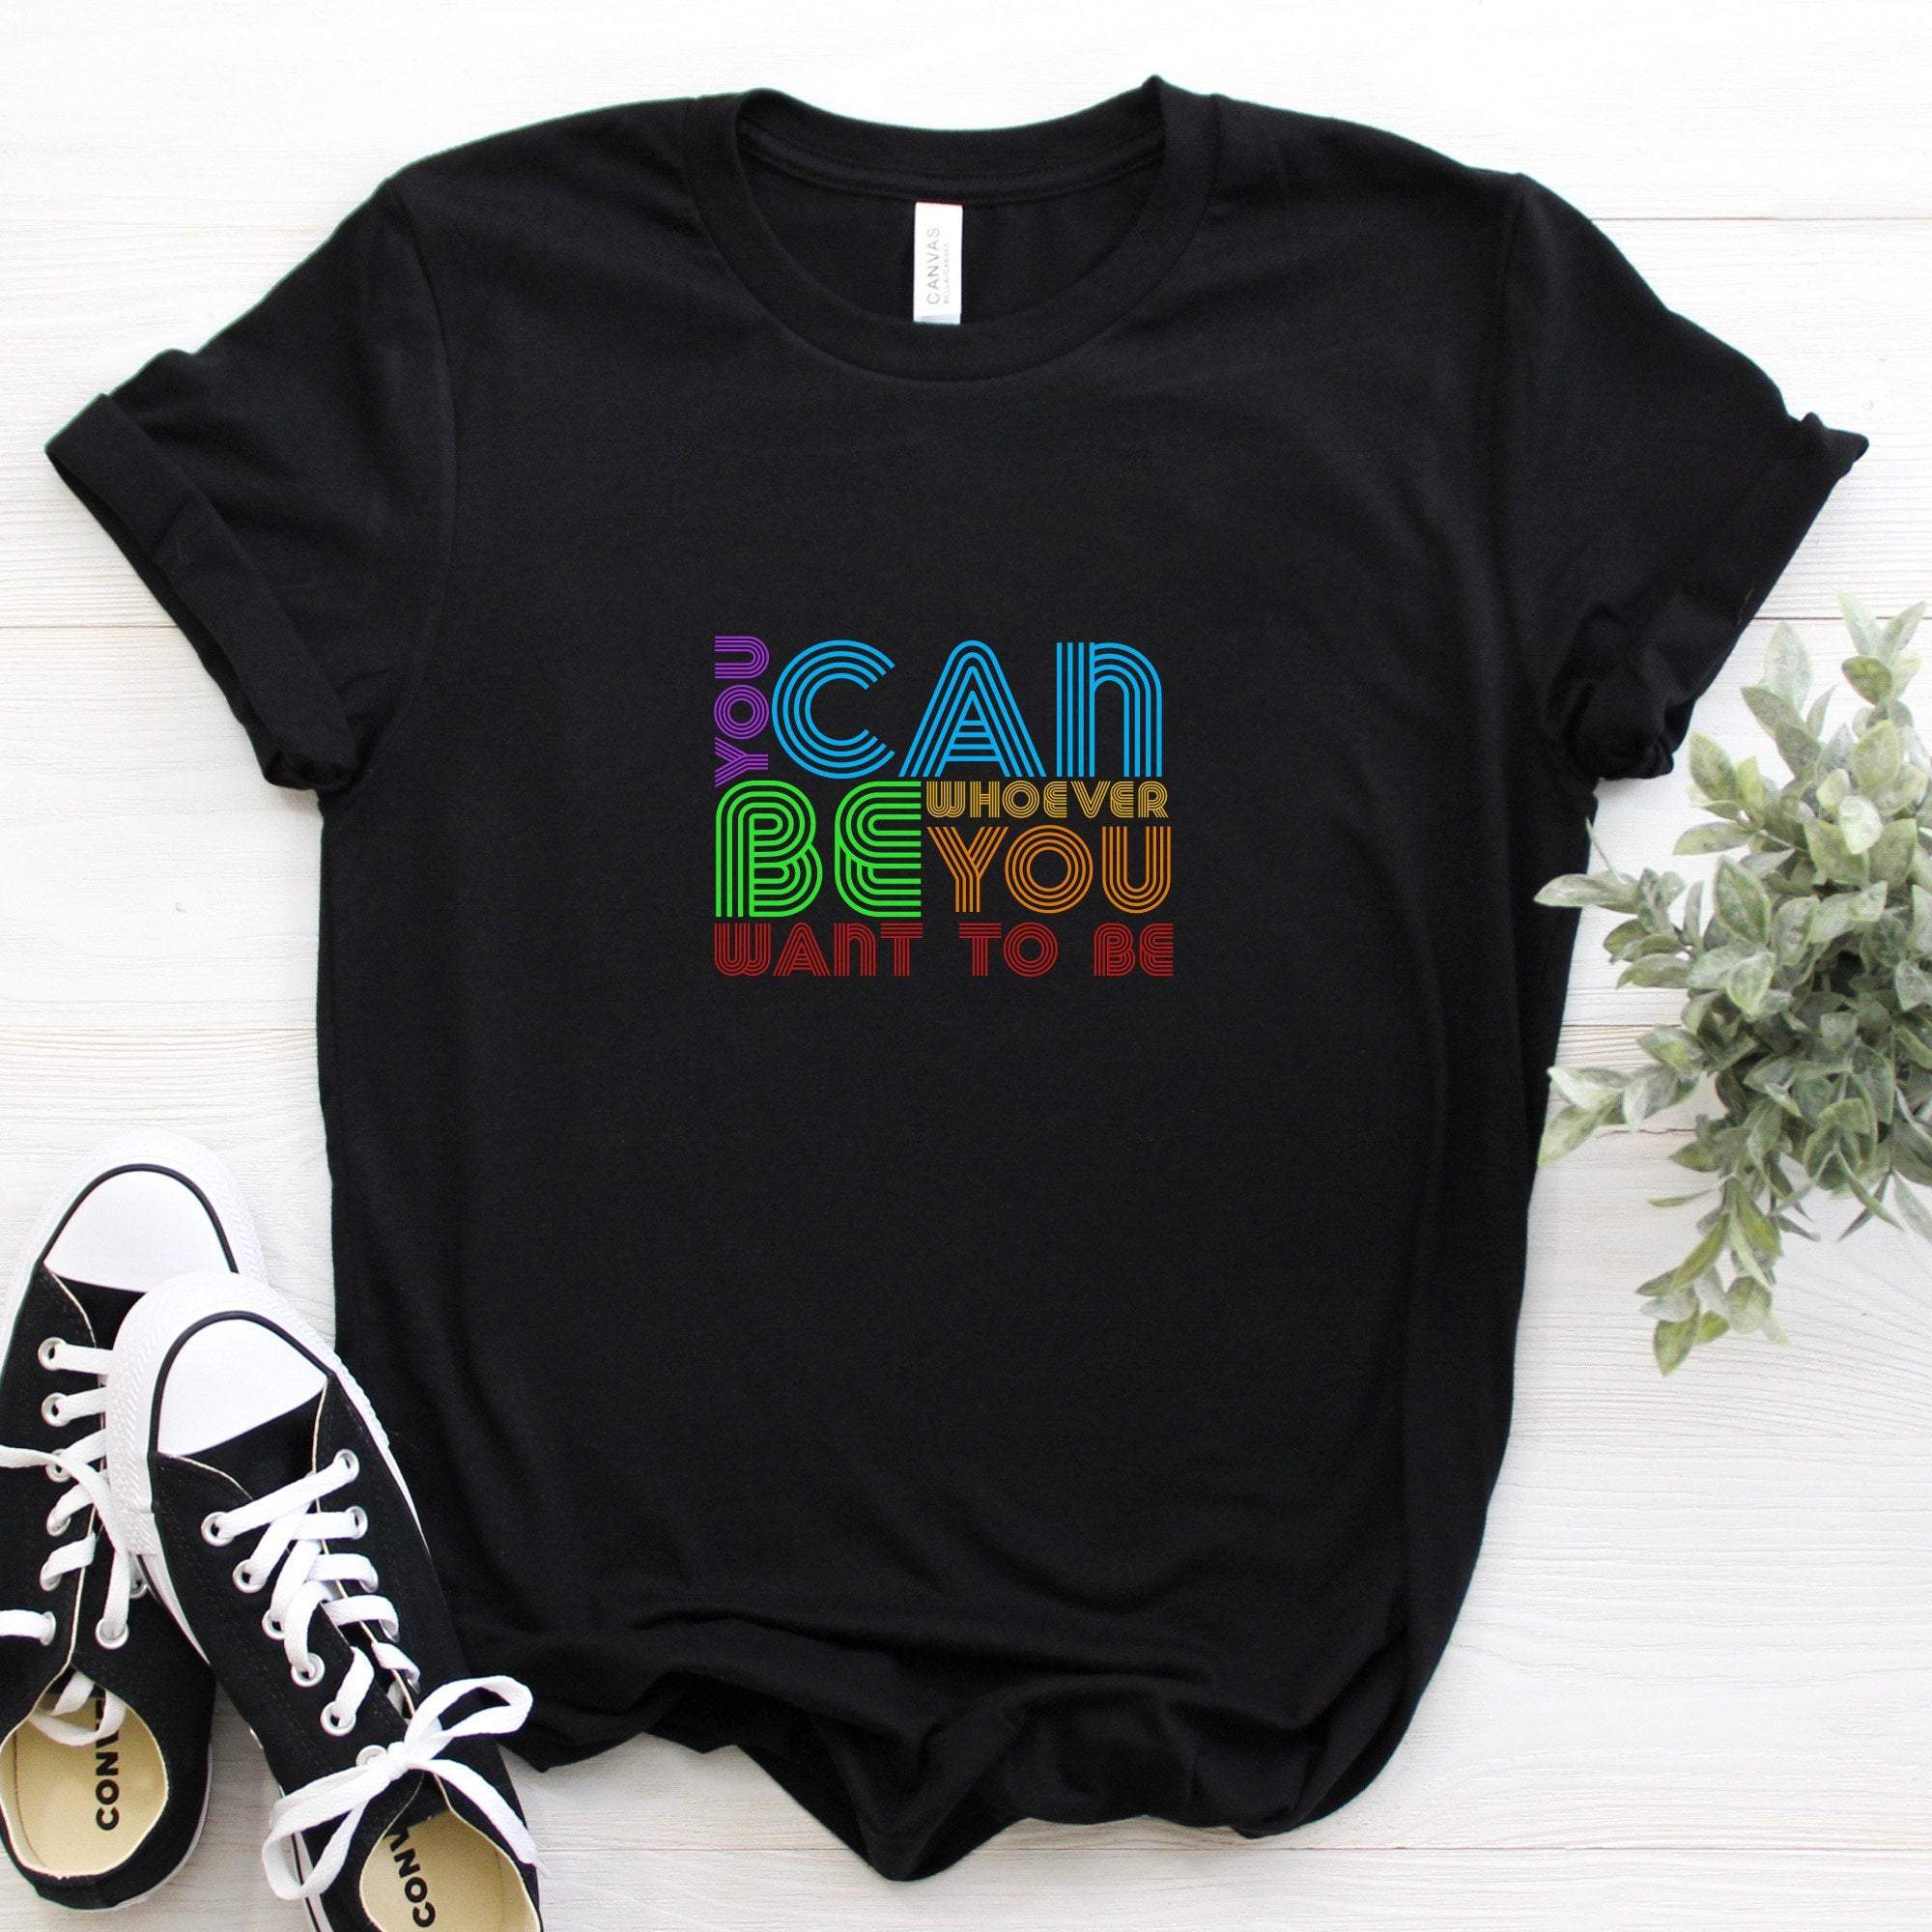 You can be whoever you want to be t-shirt, UNISEX Rainbow tee, Pride gift, LGBTQ flag tshirt